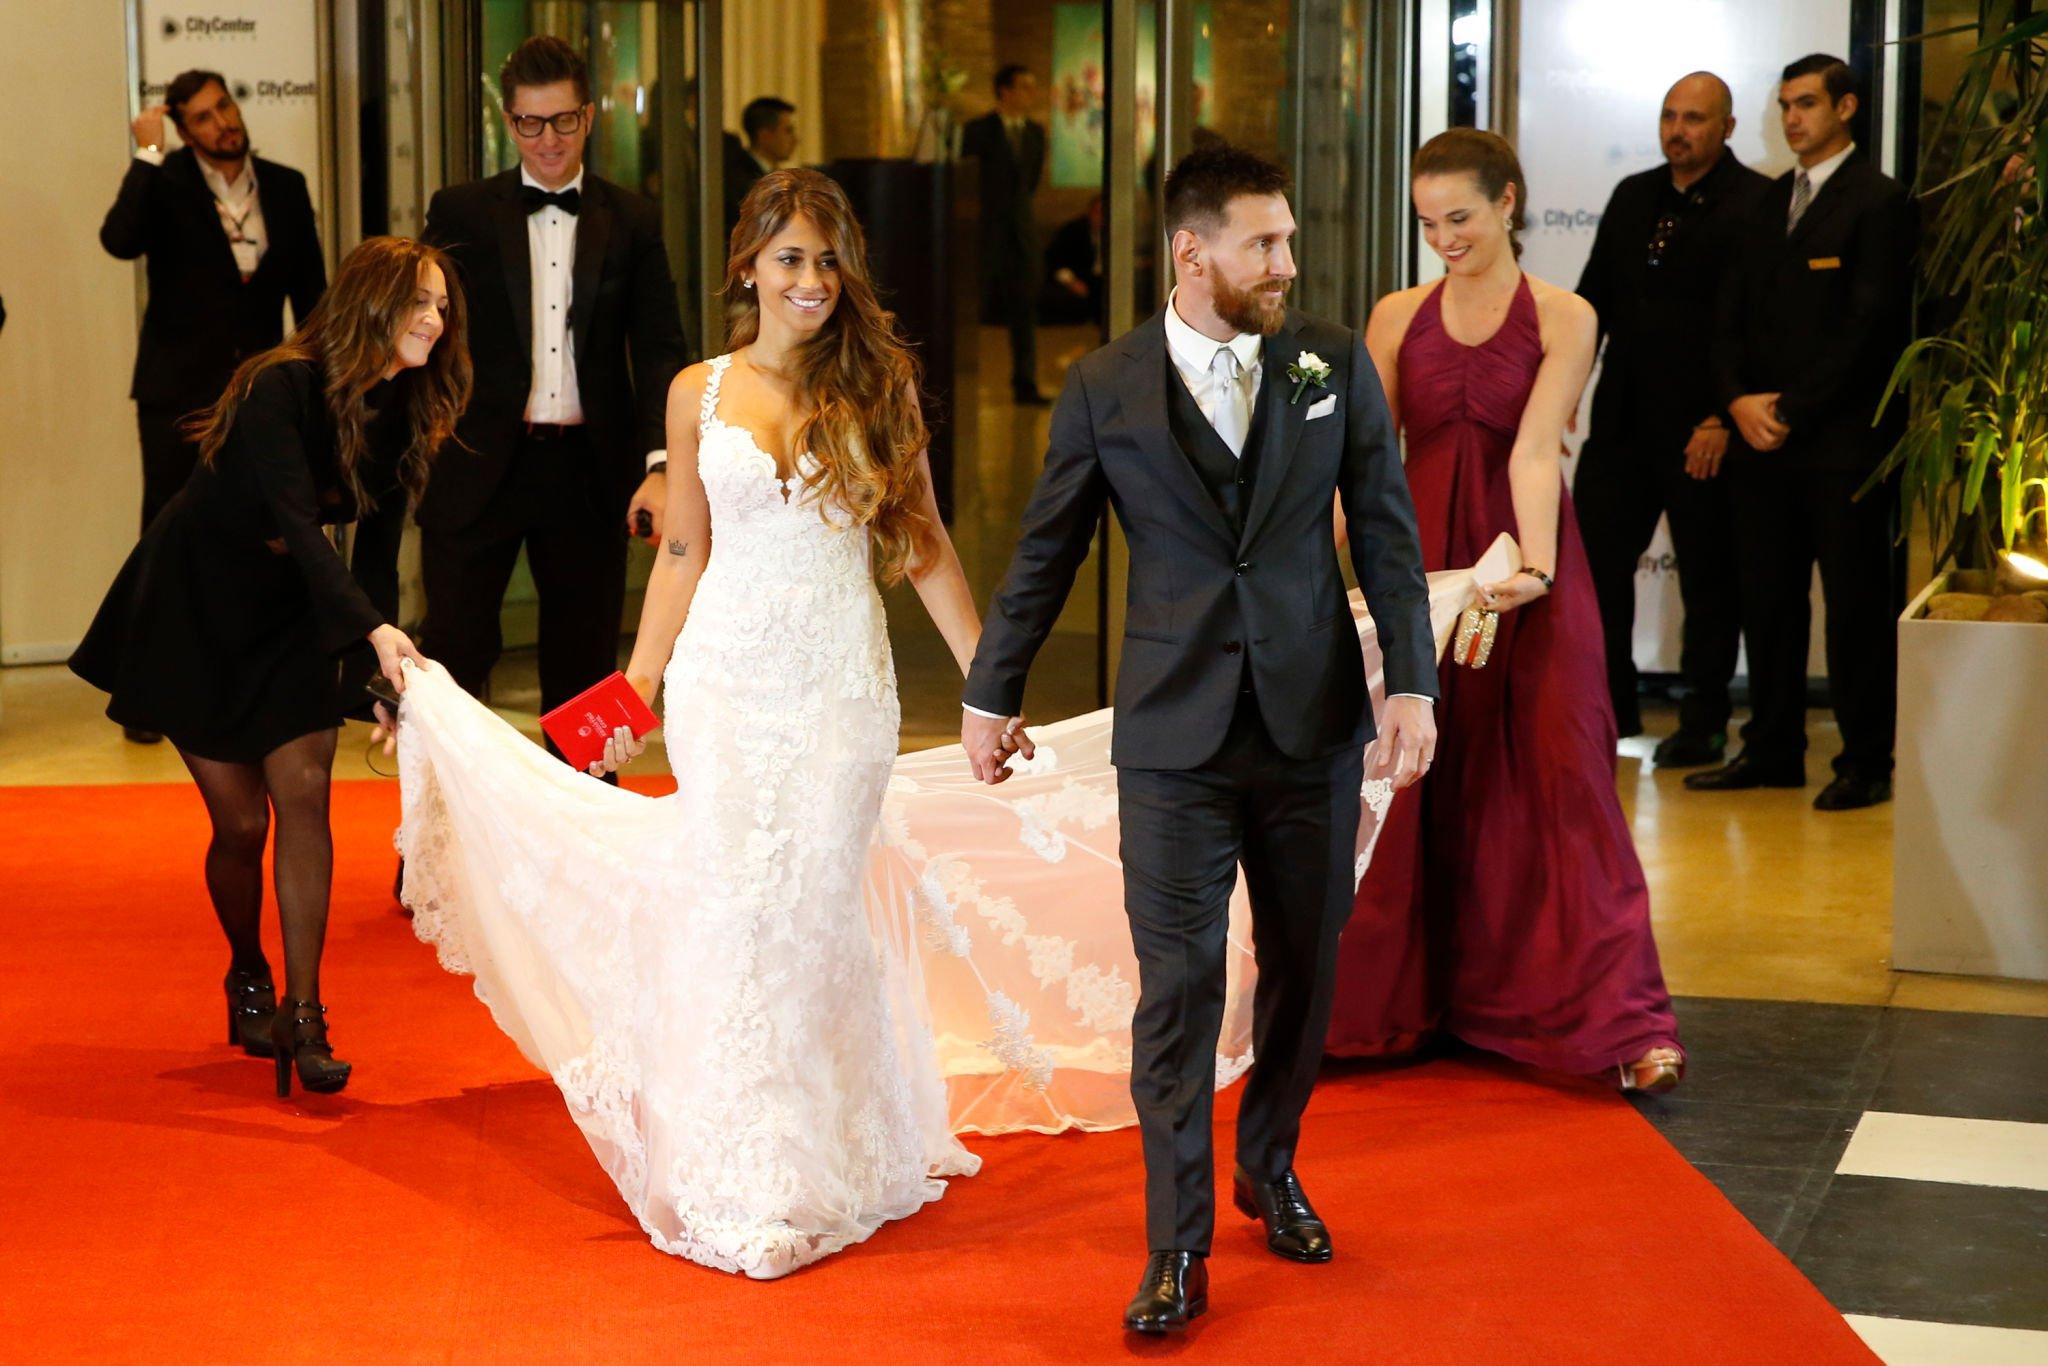 Why Did Messi Marry His Wife